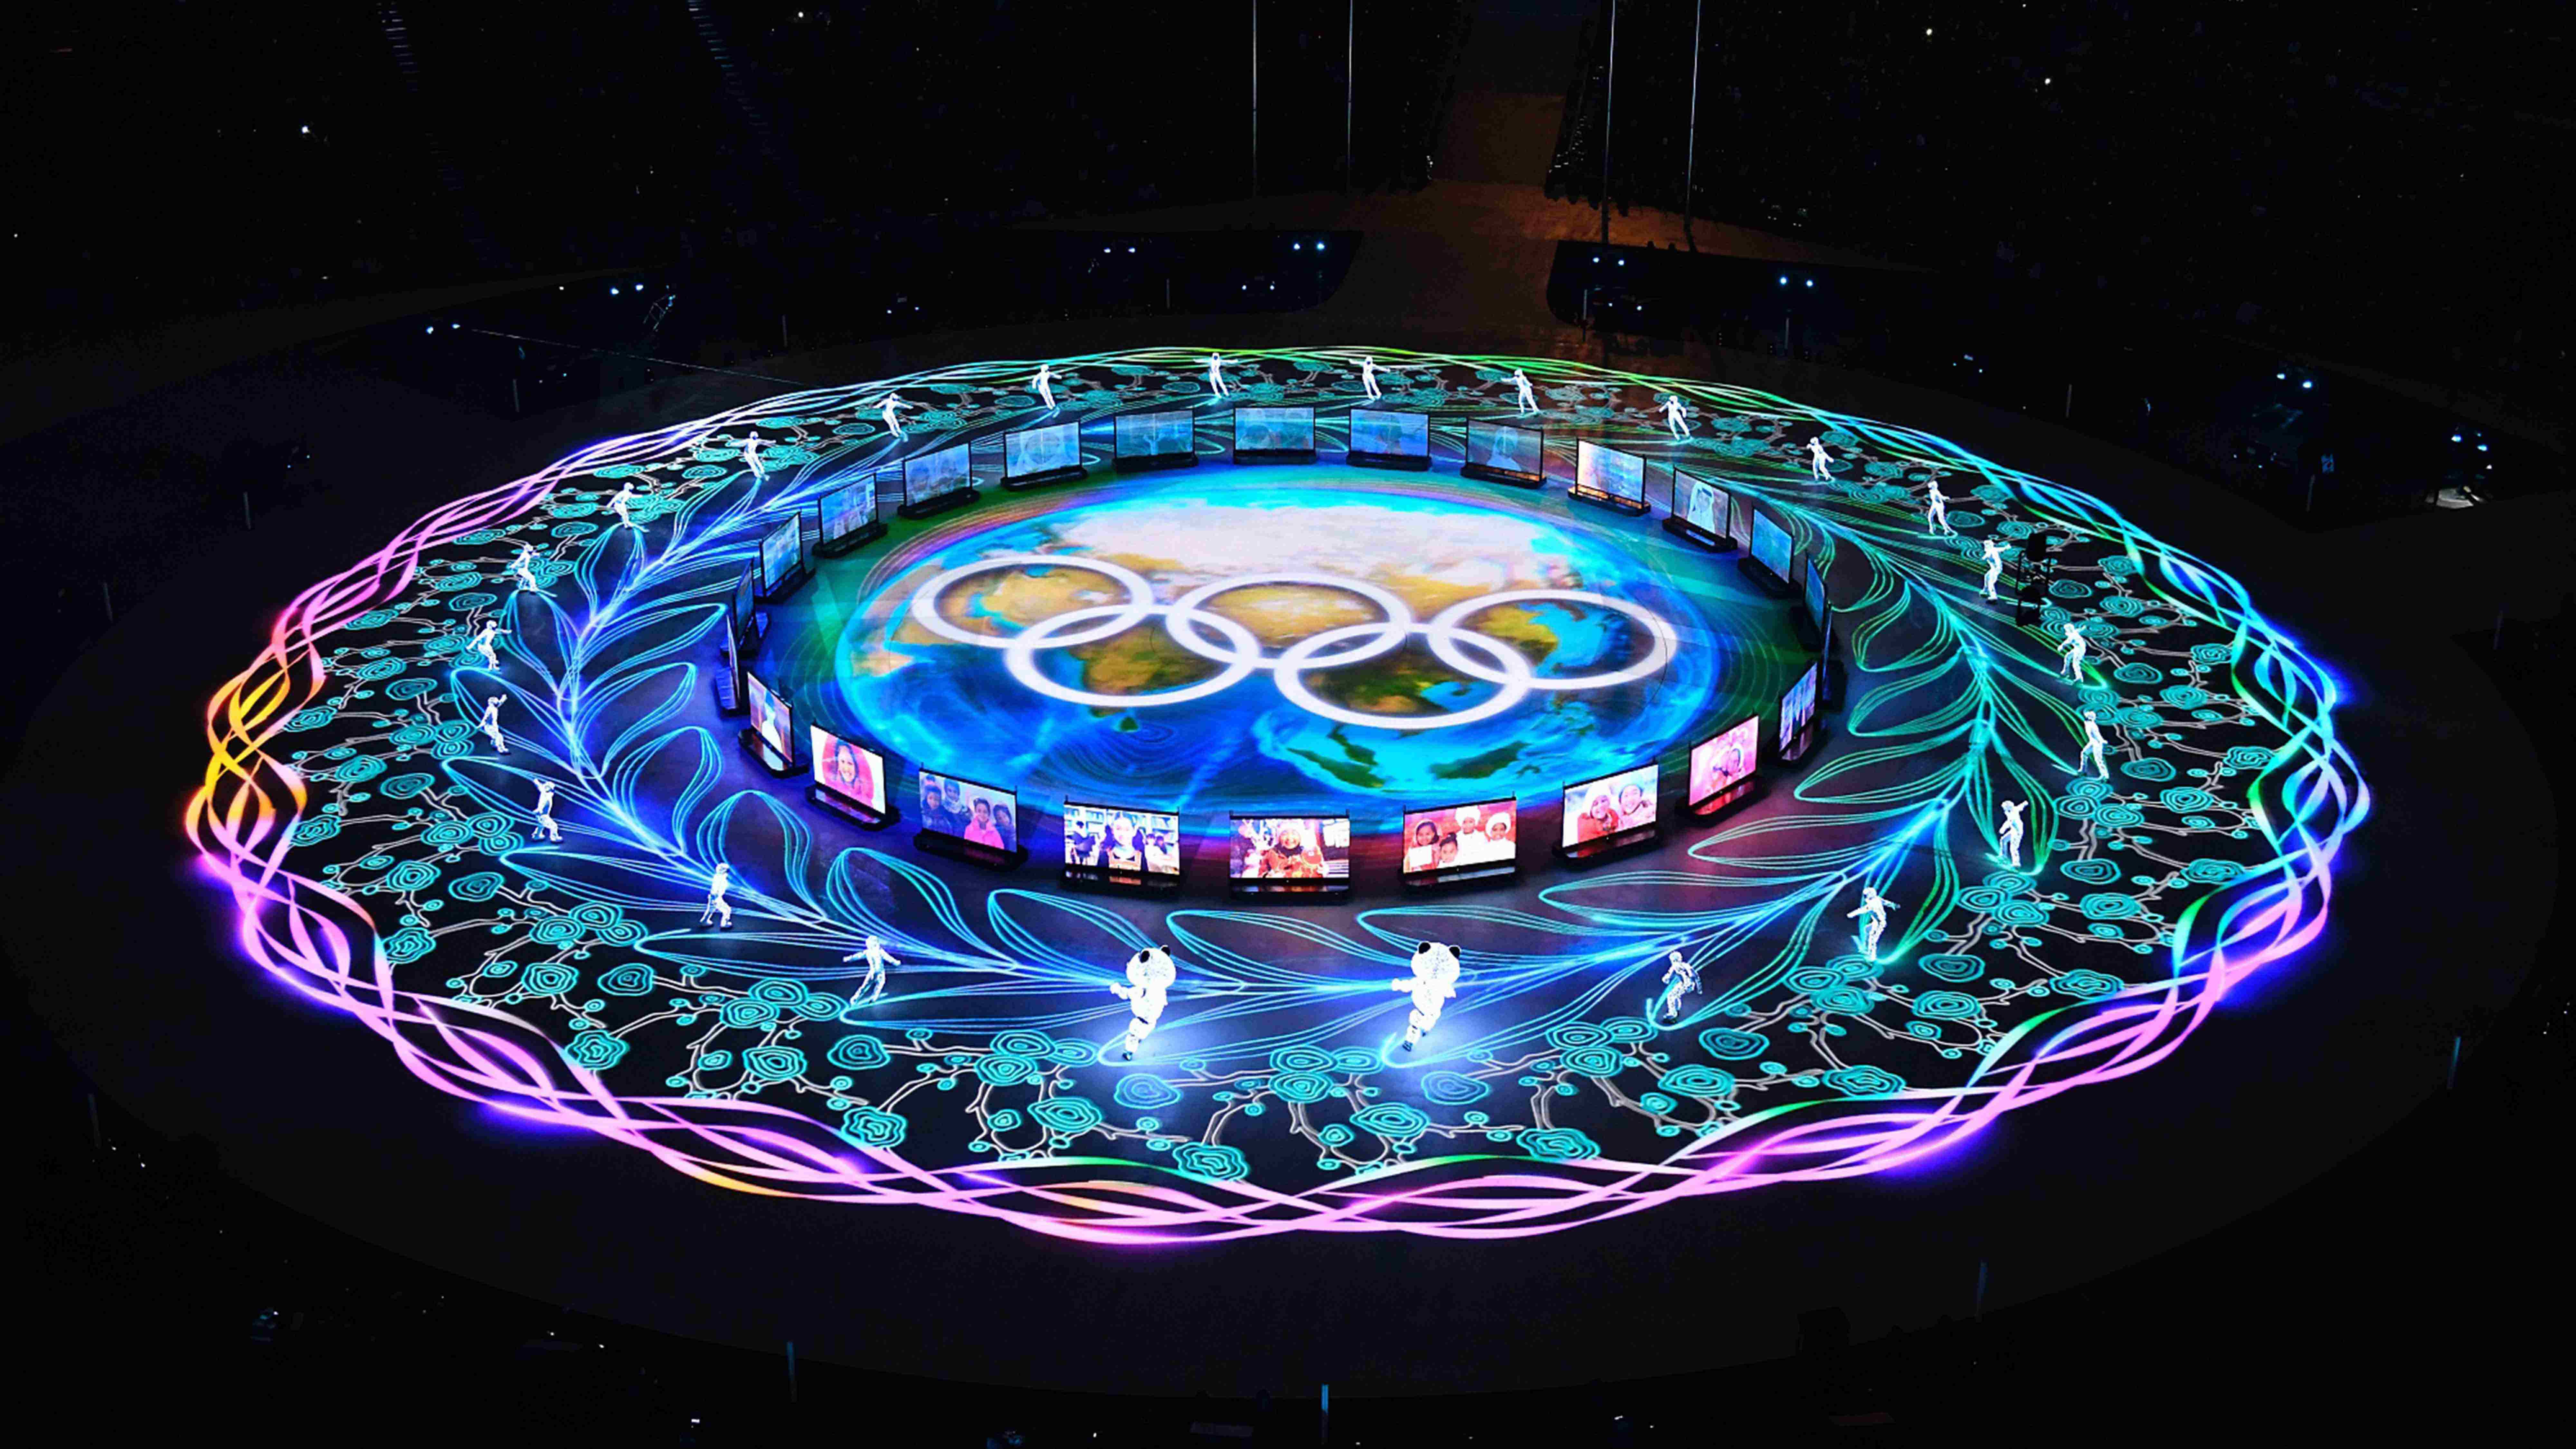 China, as the host of 2022 Winter Olympics, presented an eightminute